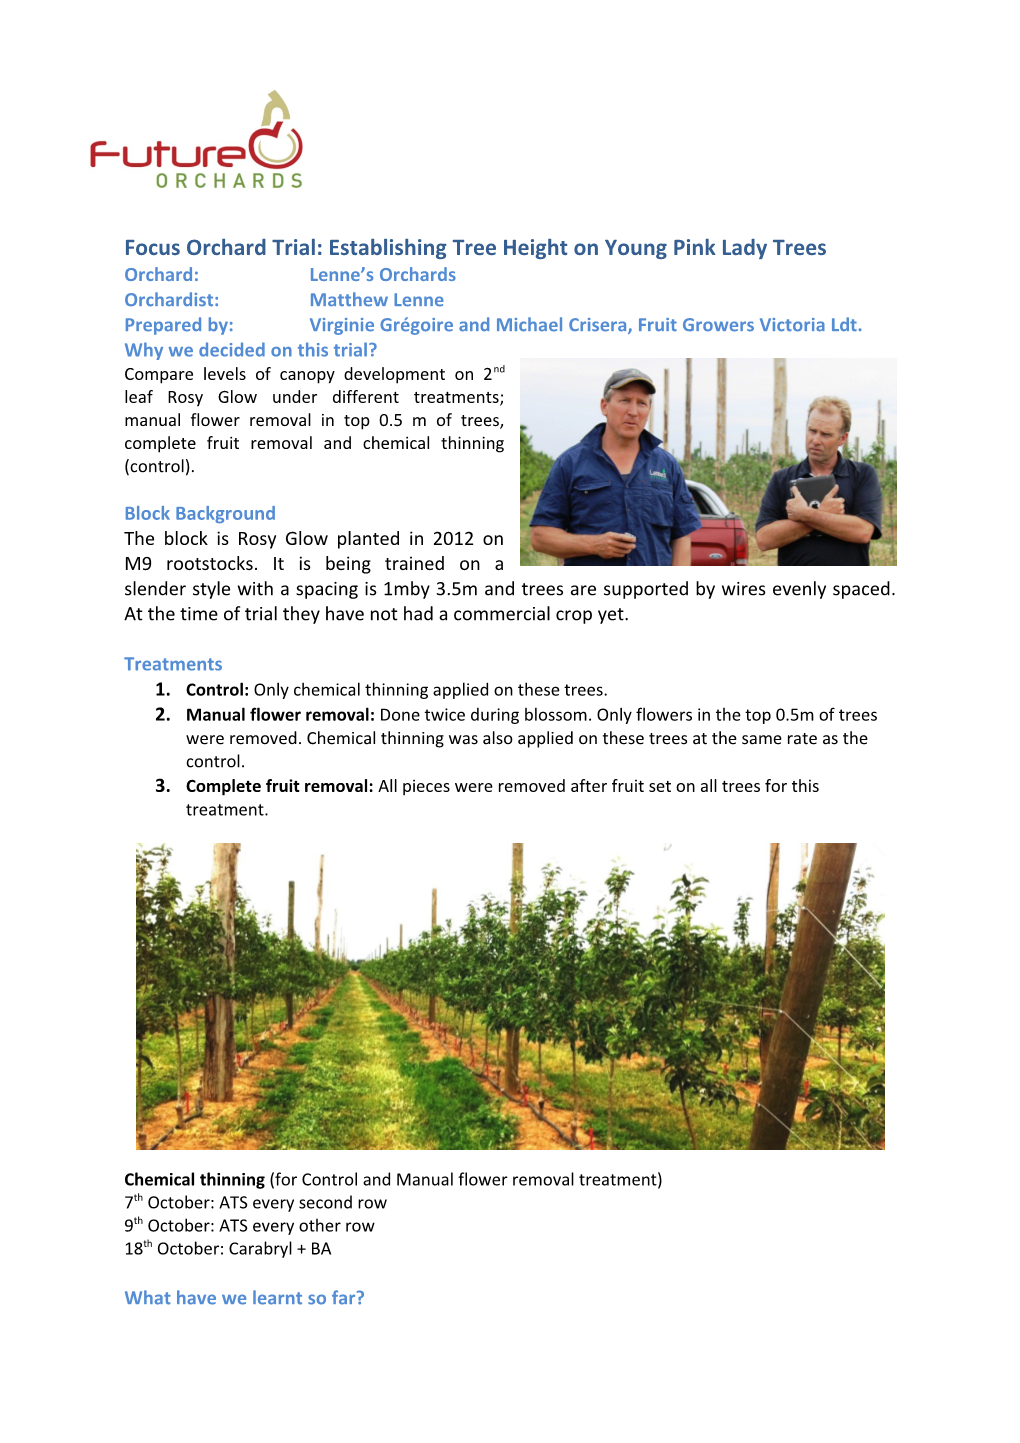 Focus Orchard Trial: Establishing Tree Height on Young Pink Lady Trees